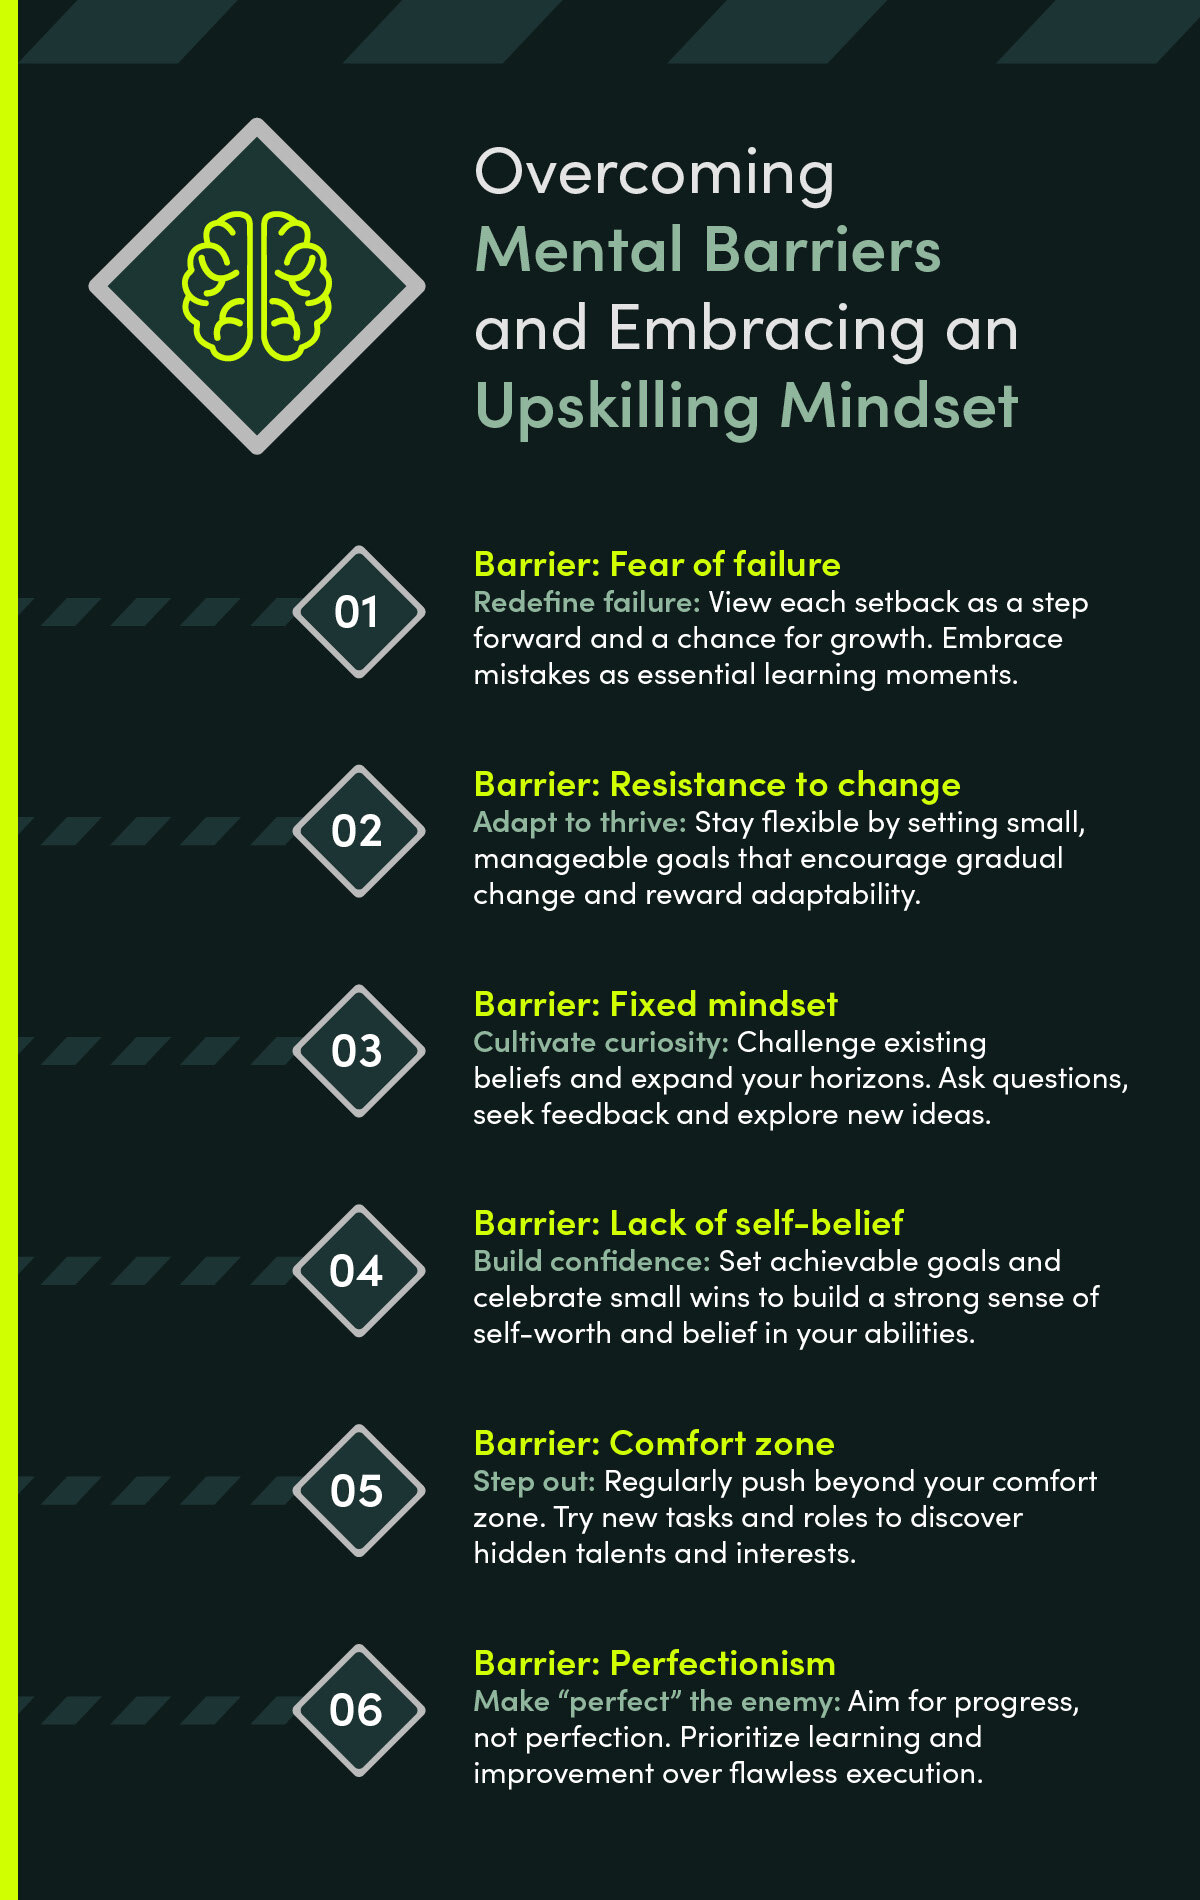 Here are practical steps that small business owners can take to foster a growth mindset: